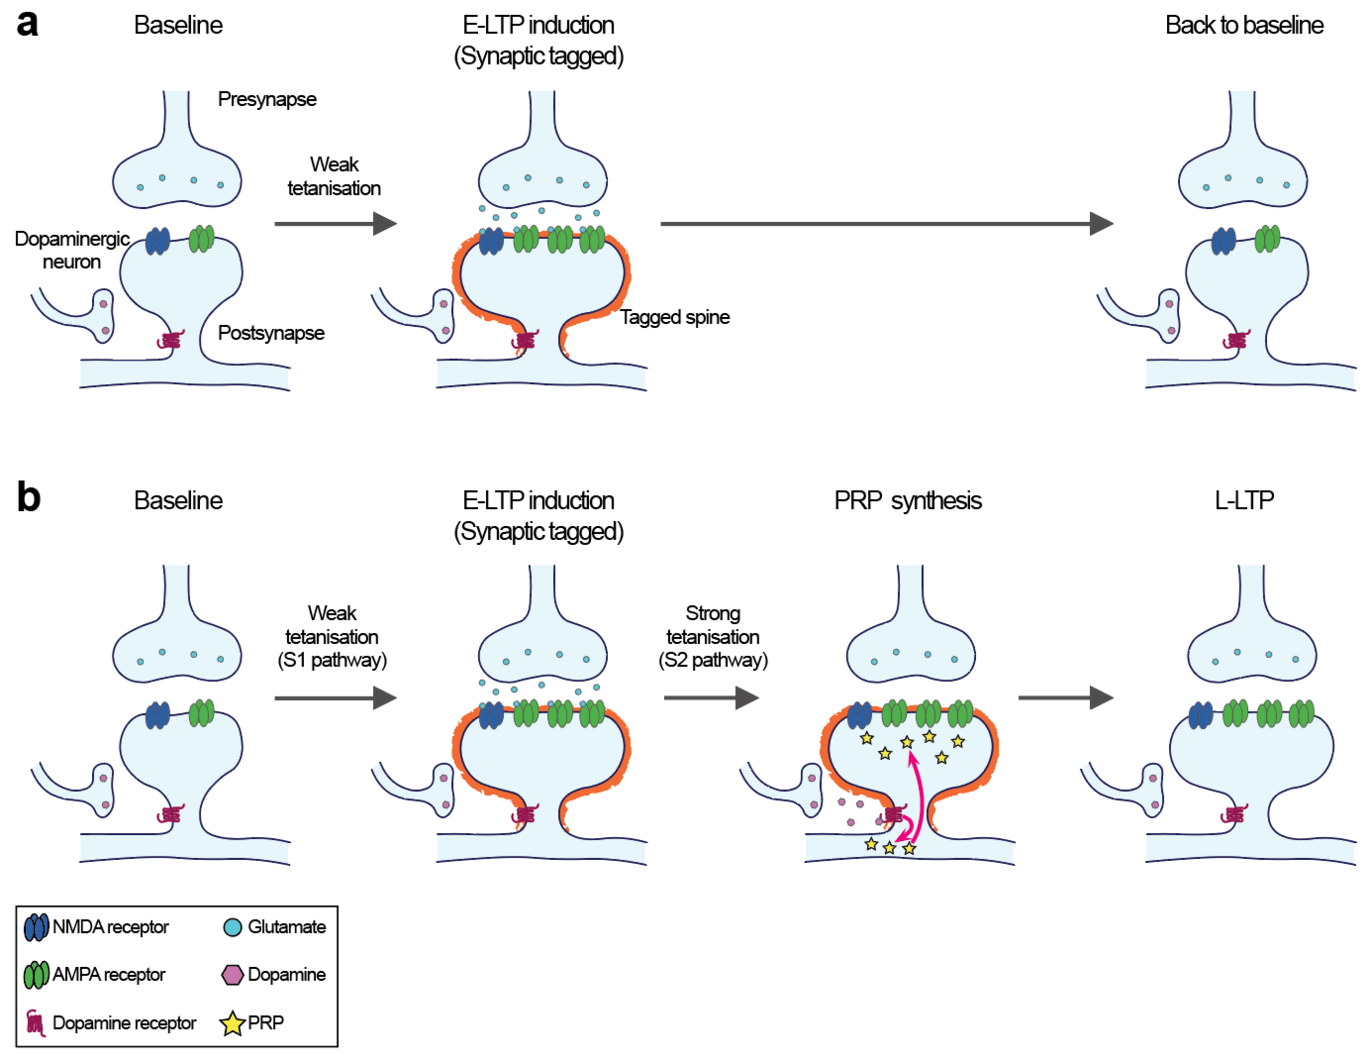 Graphic from the article: Molecular mechanisms of synaptic plasticity and dopamine signaling involved in the synaptic tagging and capture (STC) hypothesis